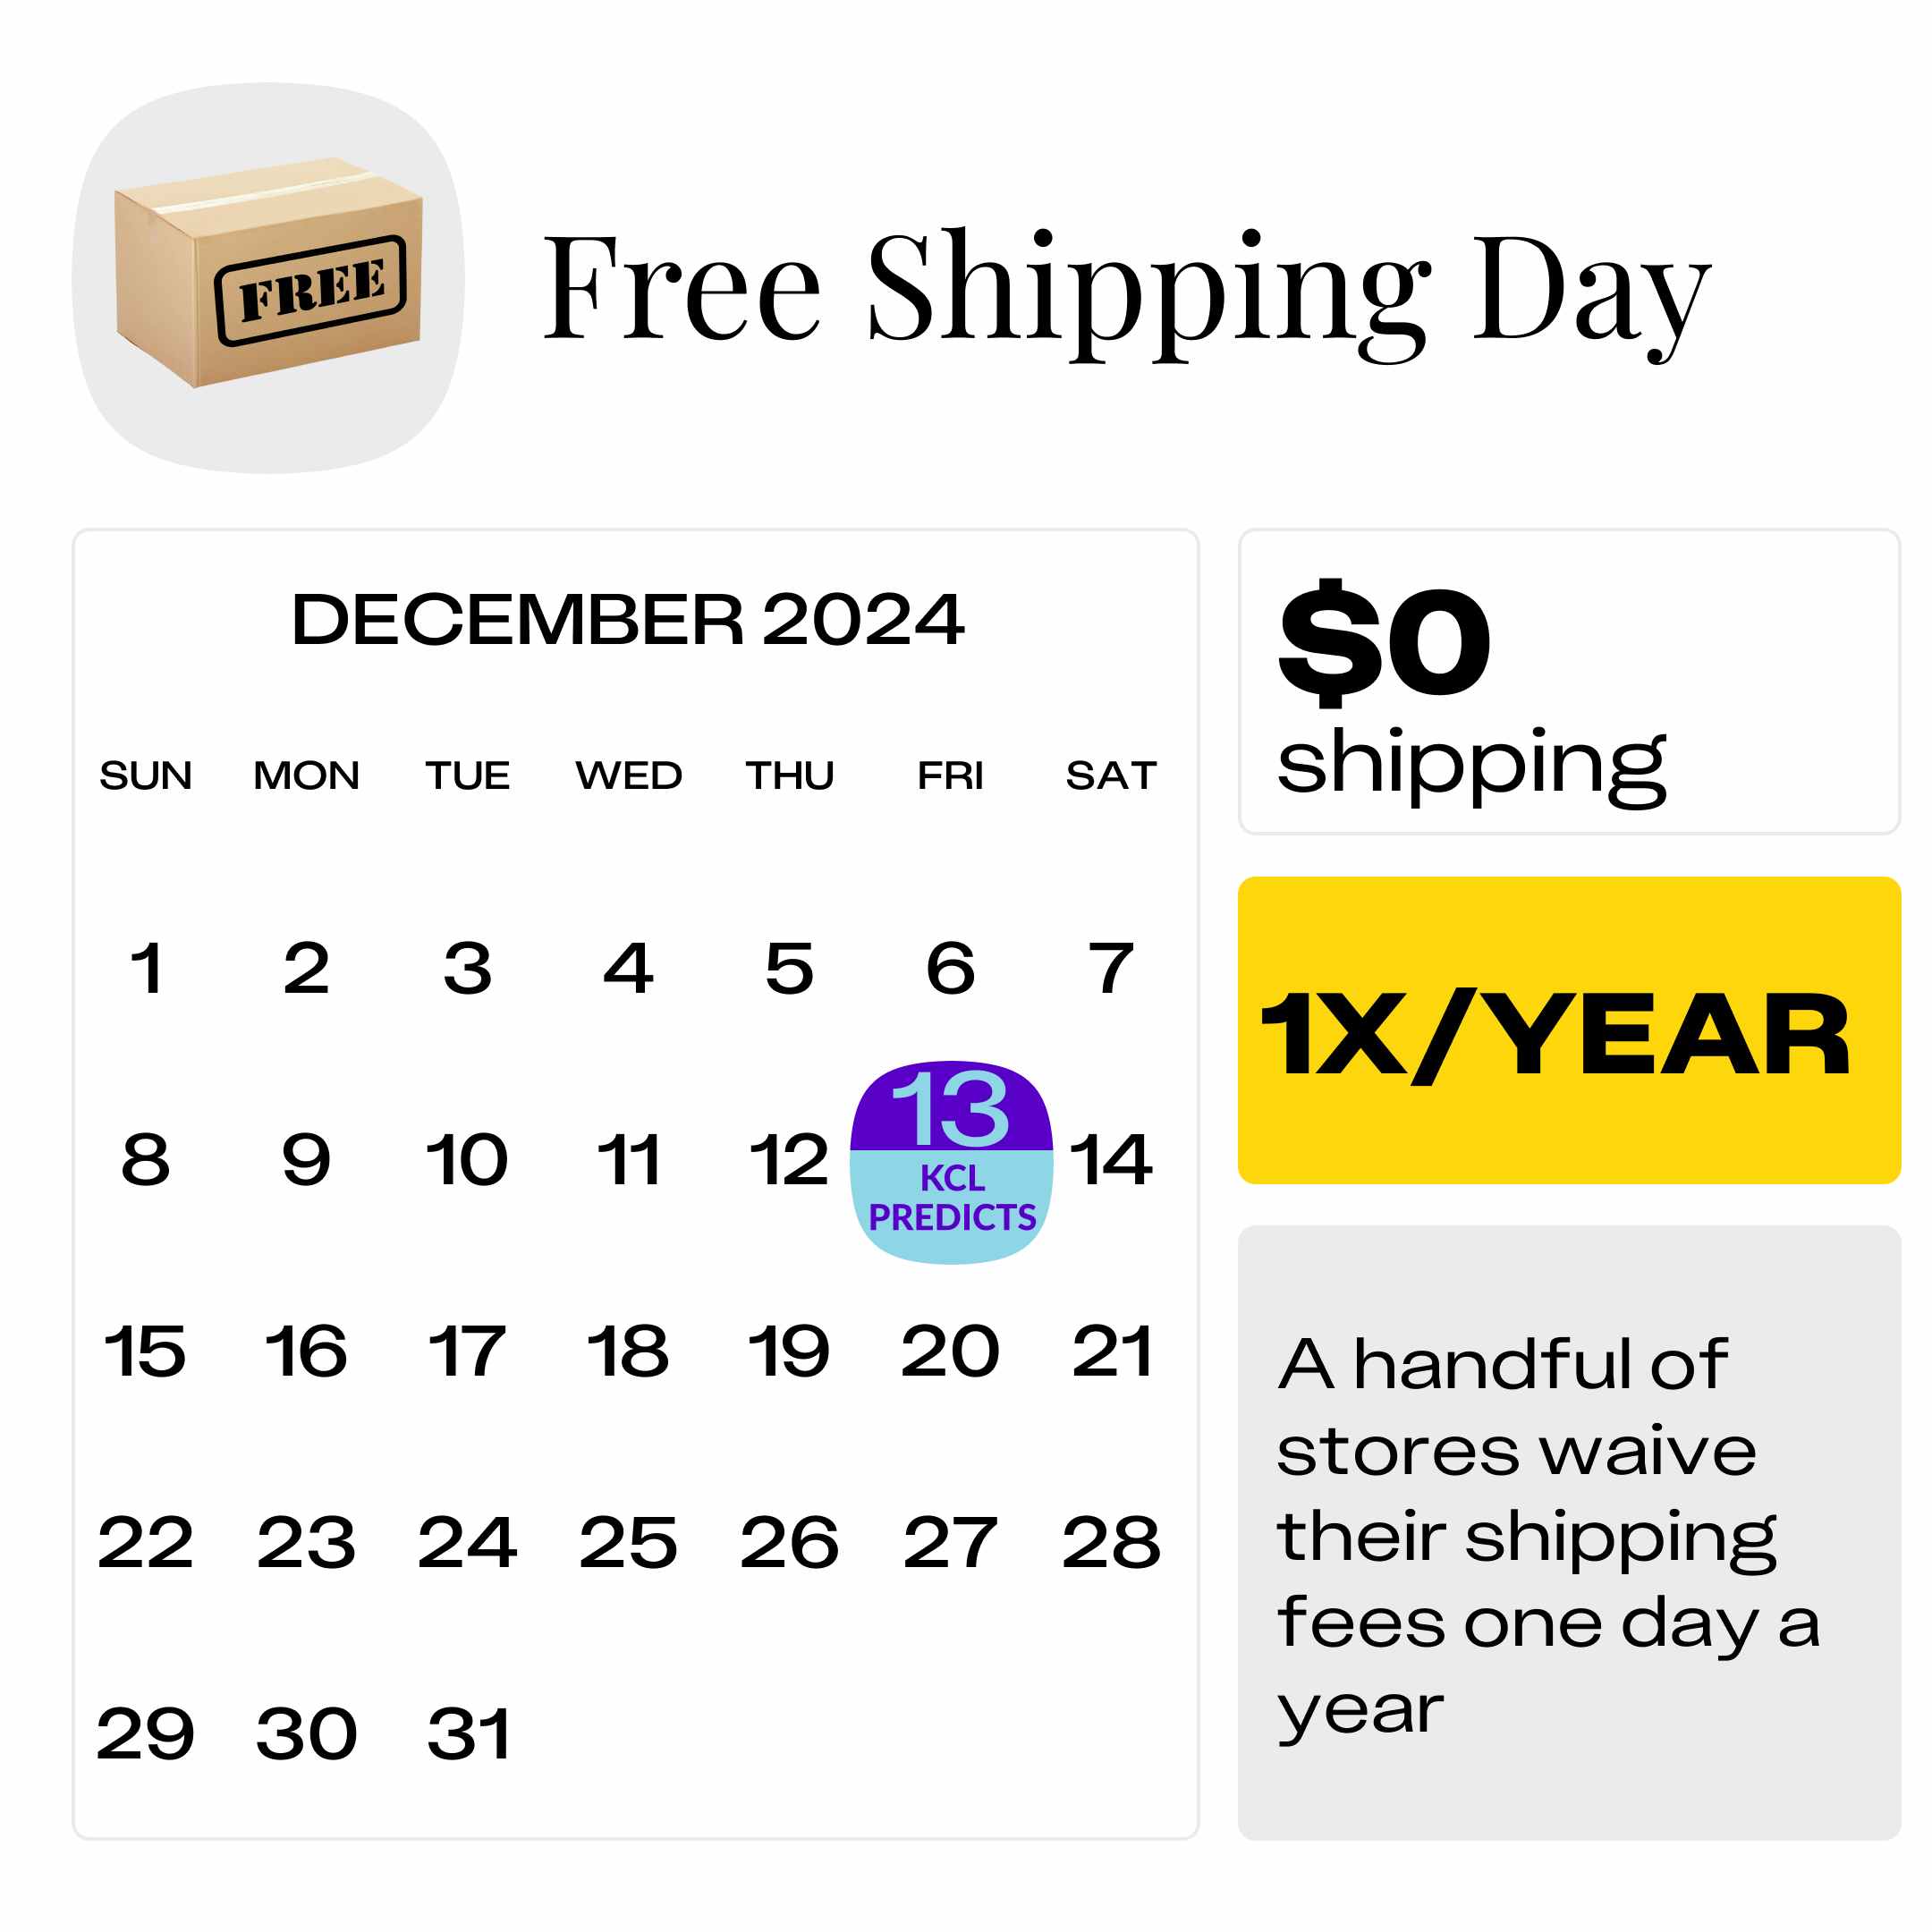 FREE SHIPPING DAY - December 14, 2024 - National Today